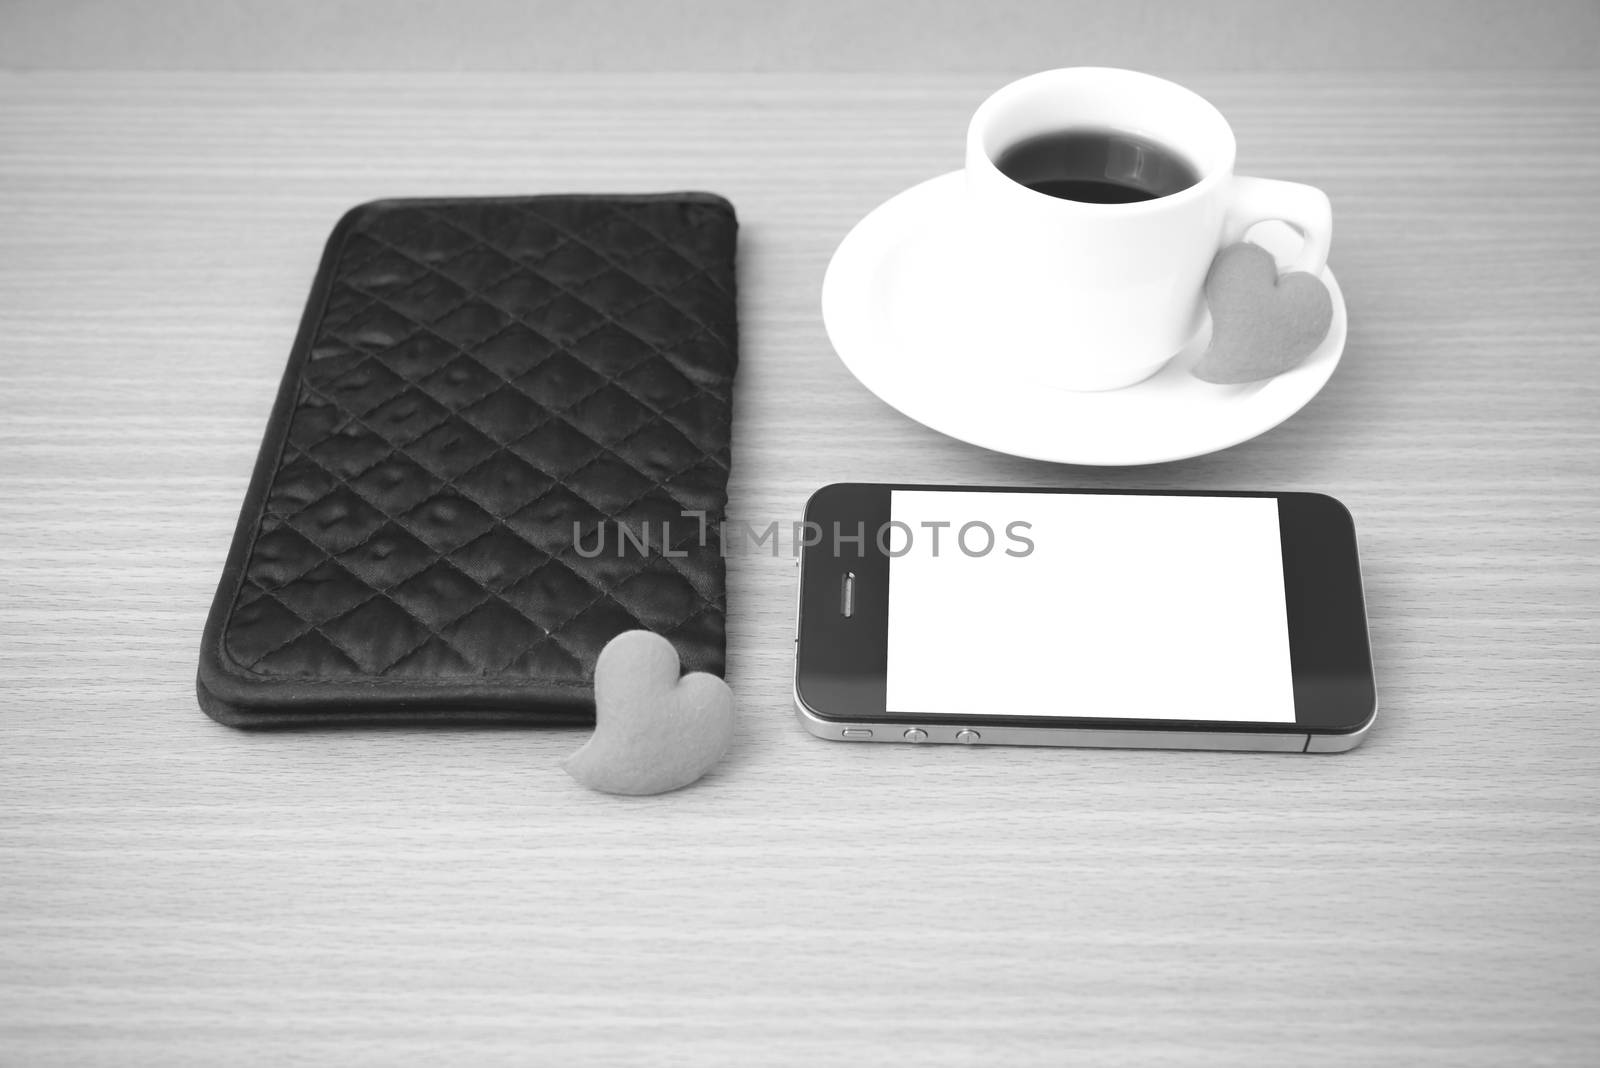 coffee,phone,wallet and heart on wood table background black and white color